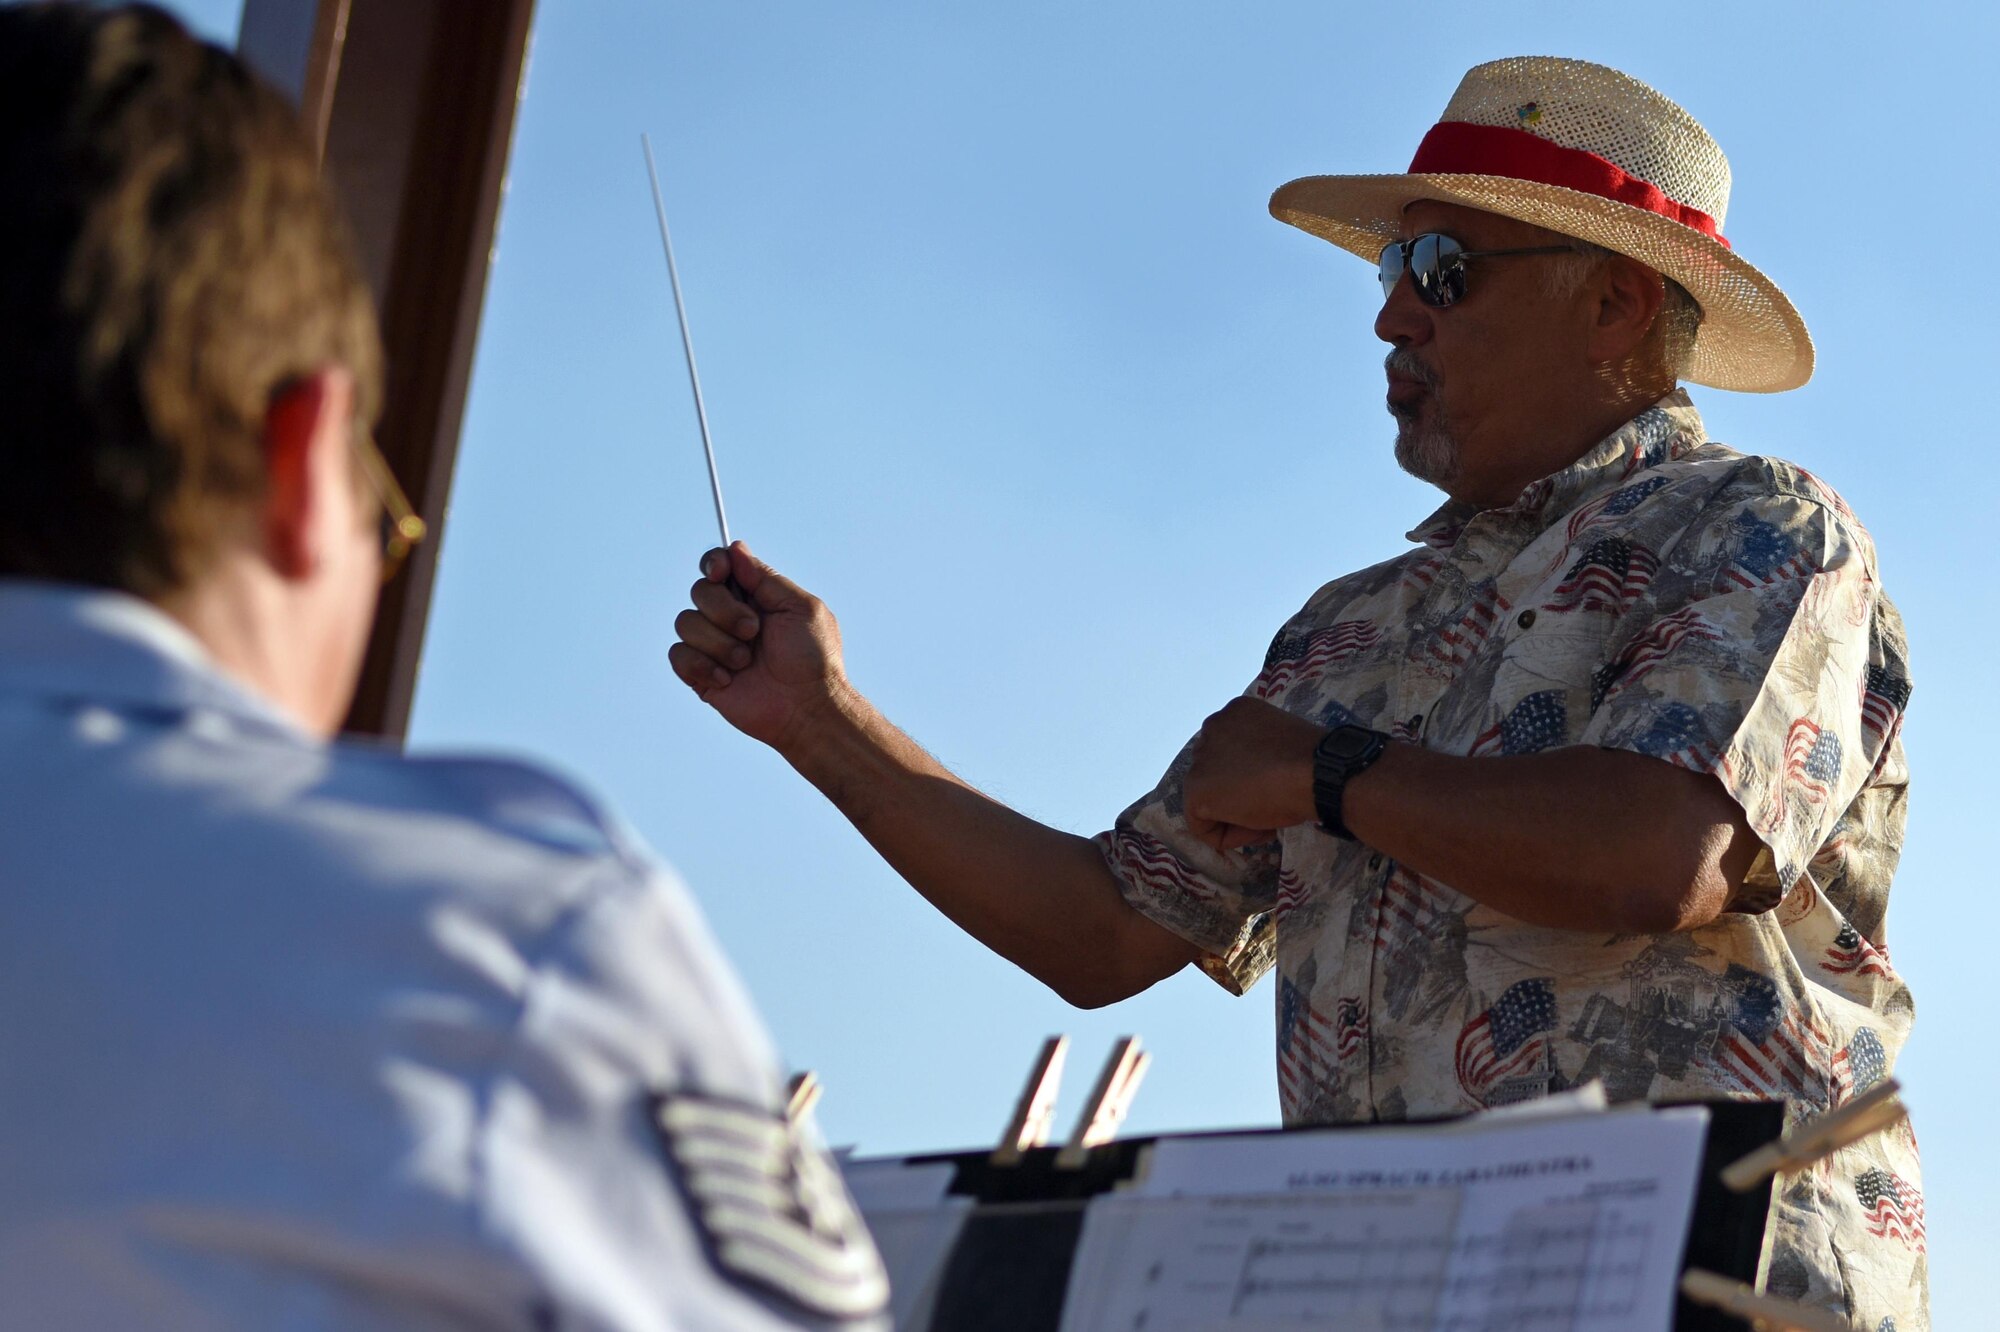 Sandy Moriarty, the mayor of Sedona, NM, guest conducts a piece of music during a performance June 29 at Posse Ground Park. Throughout the show, the band incorporated selections from Star Trek, Star Wars, Guardians of the Galaxy, and Beauty and the Beast, as well as pieces from famous composers William Grant Still and John Phillip Sousa. (Texas Air National Guard photo by Staff Sgt. Kristina Overton)